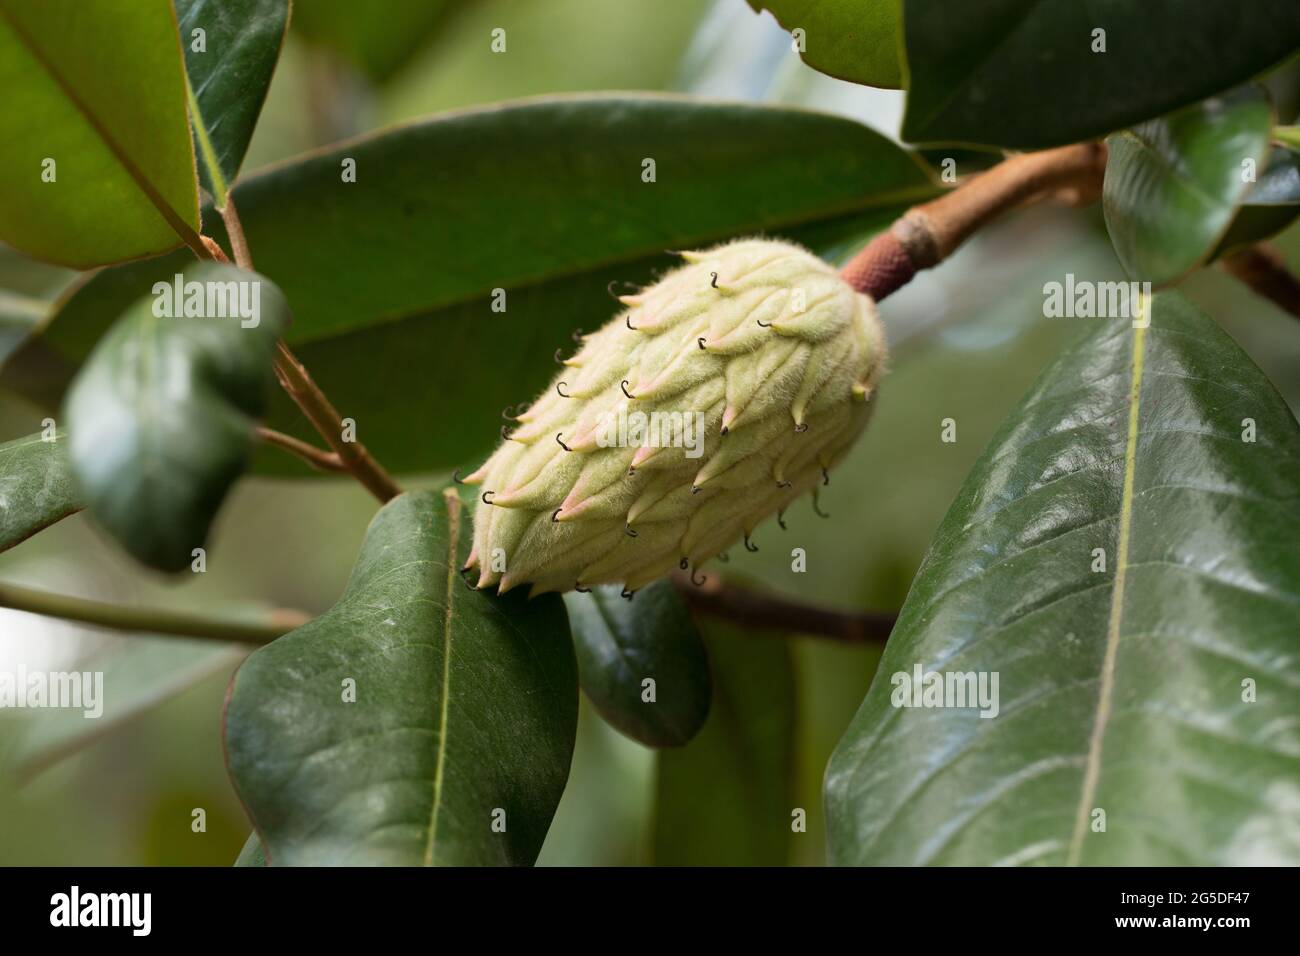 Seed Pods of the Magnolia Tree Stock Photo